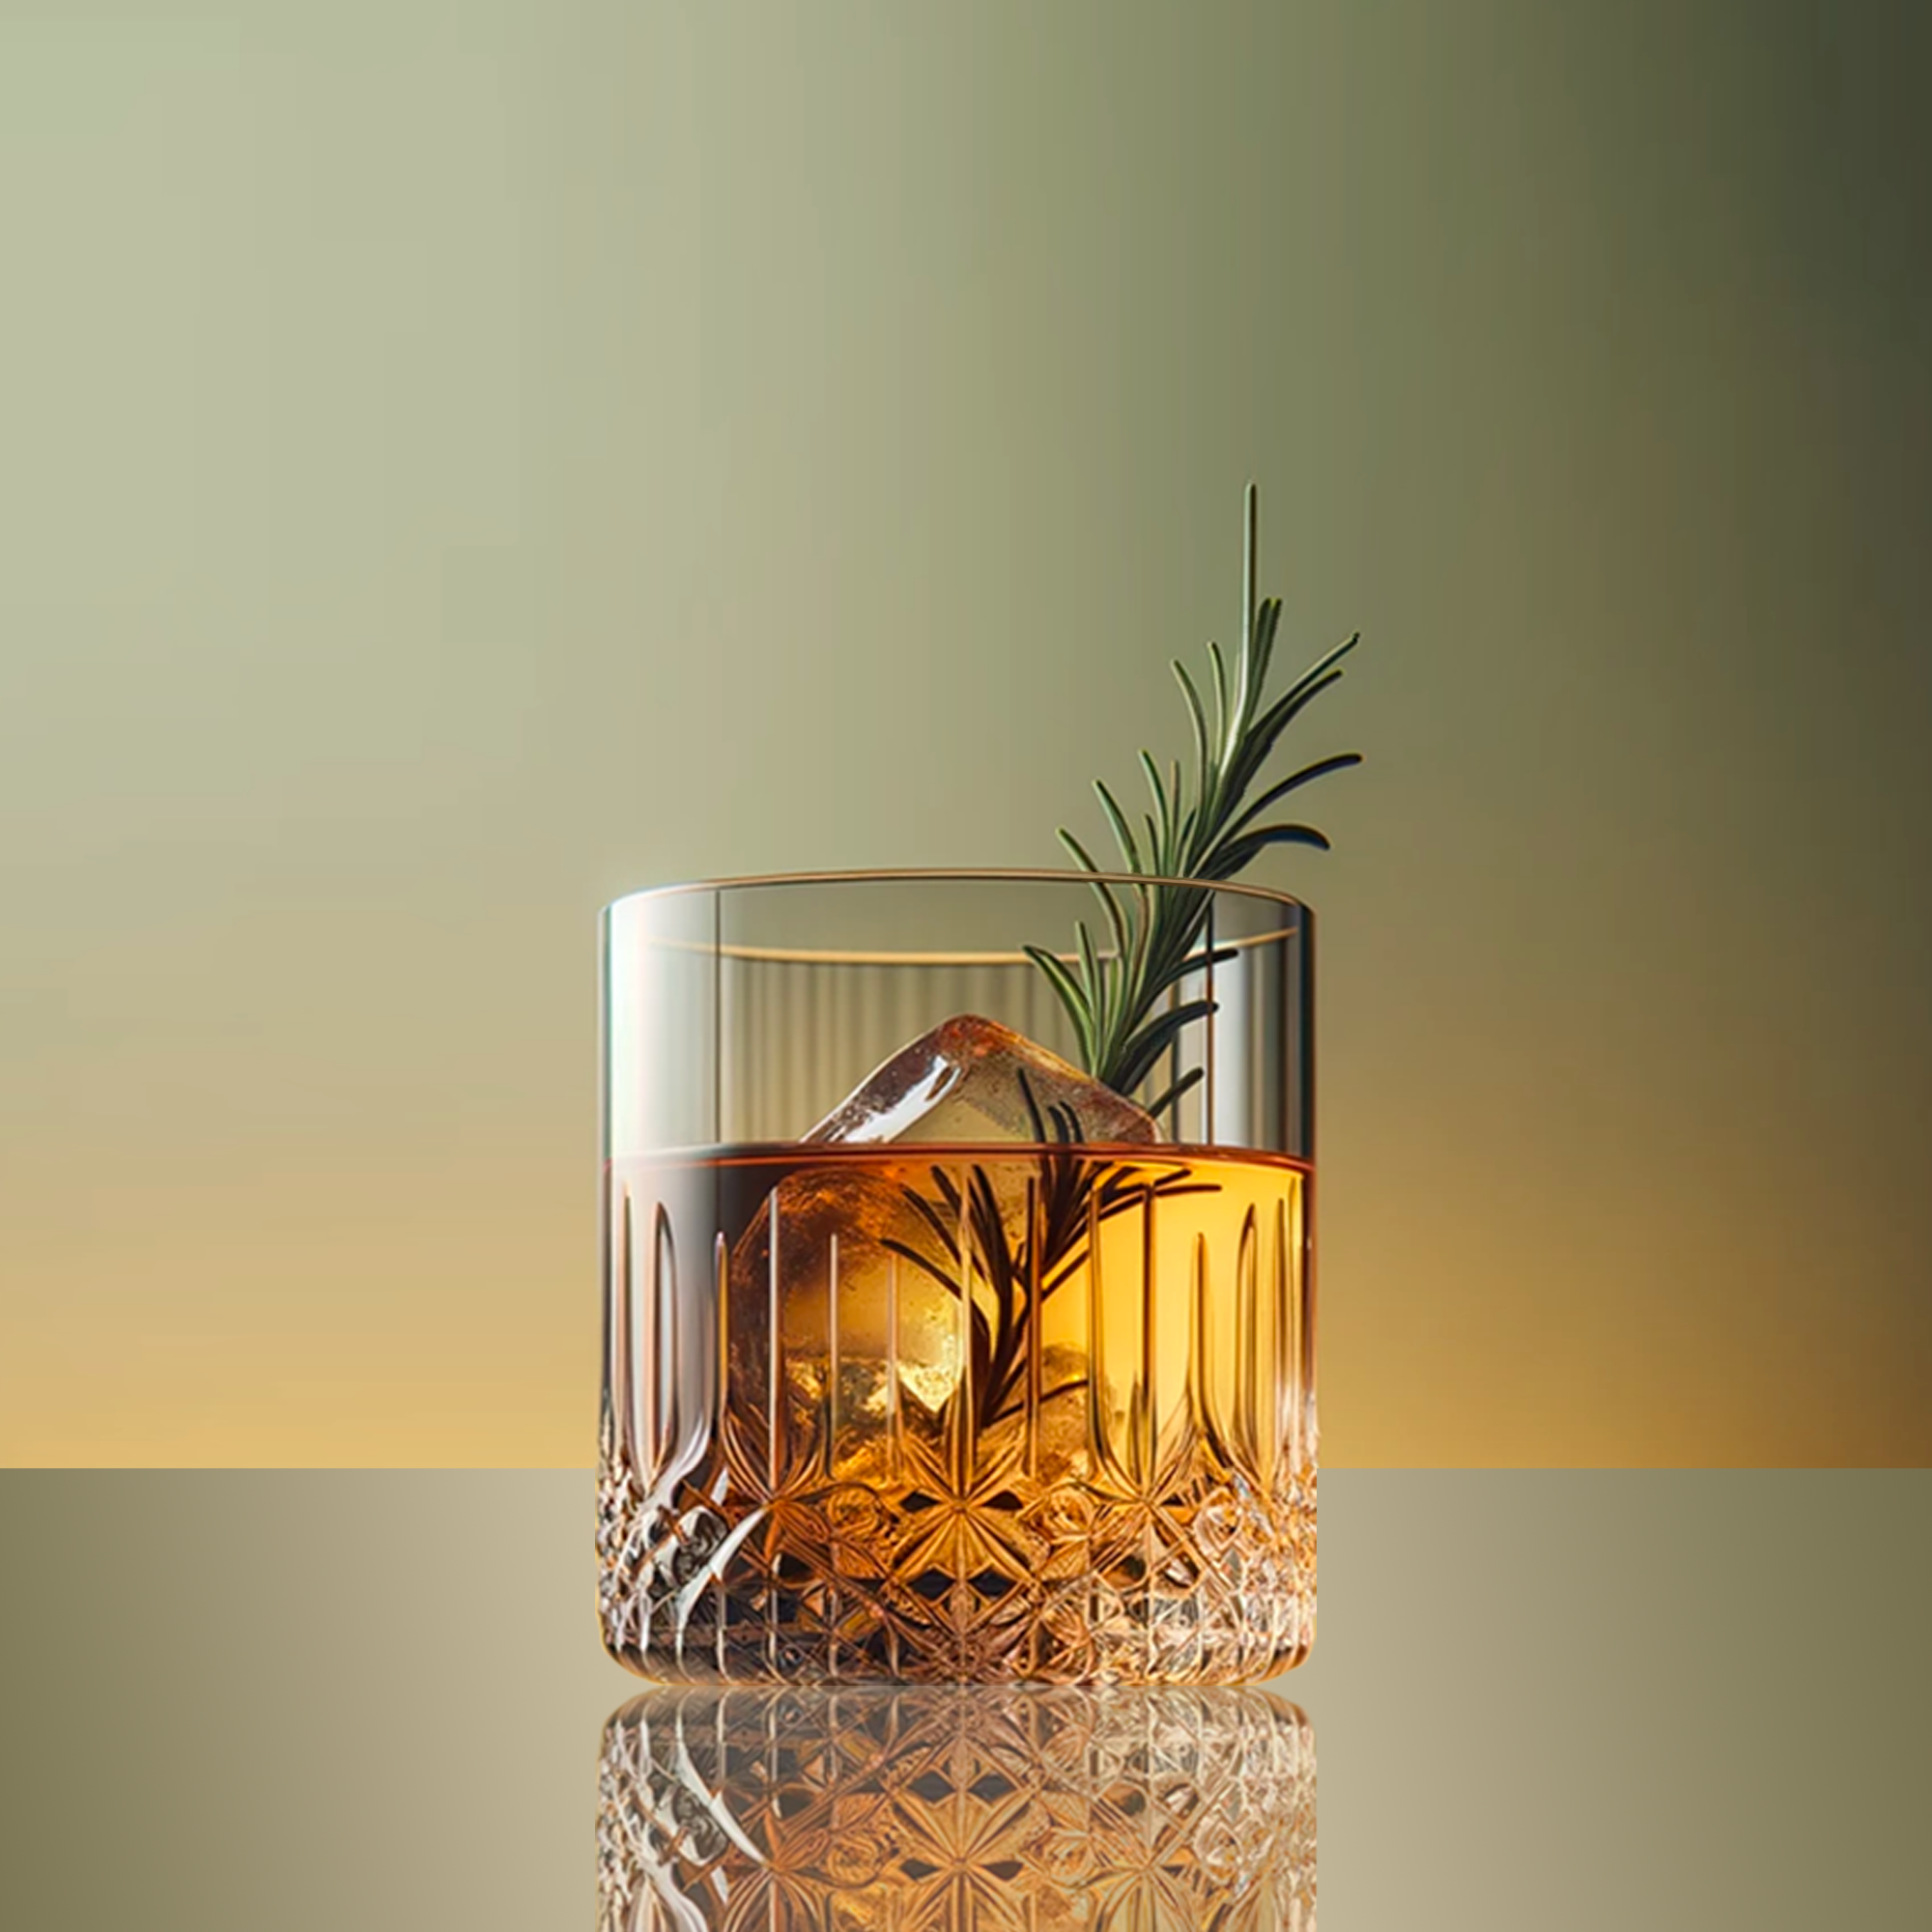 Spritz with a twist on ice with a rosemary sprig garnish. green background and amber beverage.